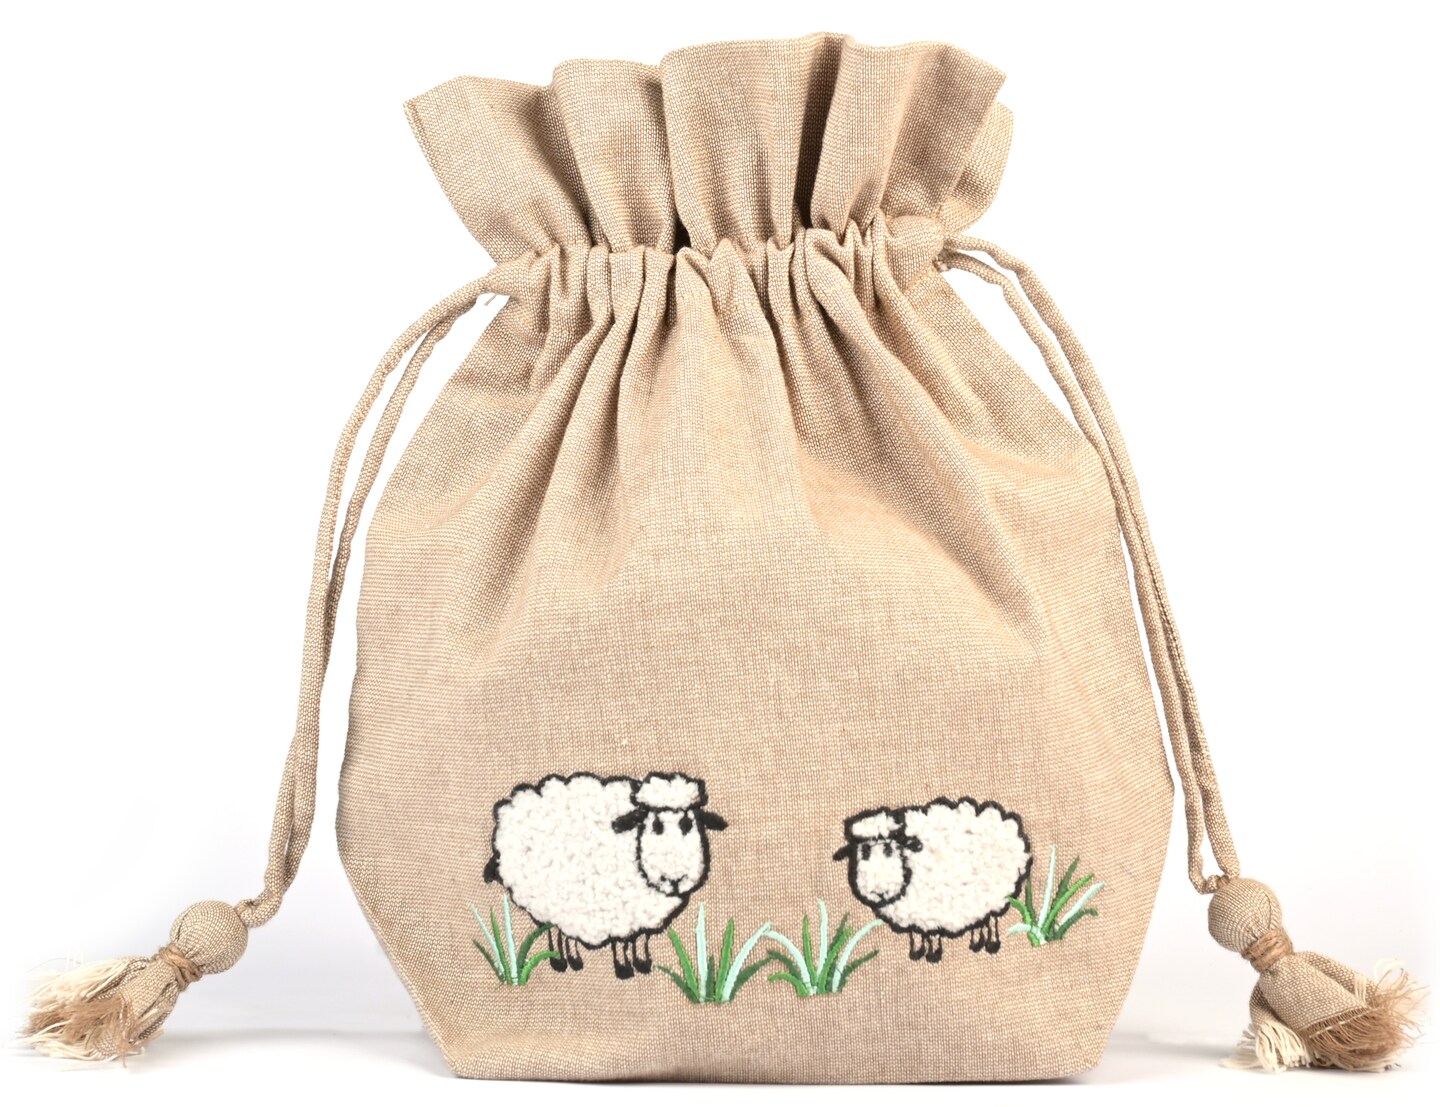 Large Knitting Bag with Appliqué Novelty Sheep - Delta Wool Shop